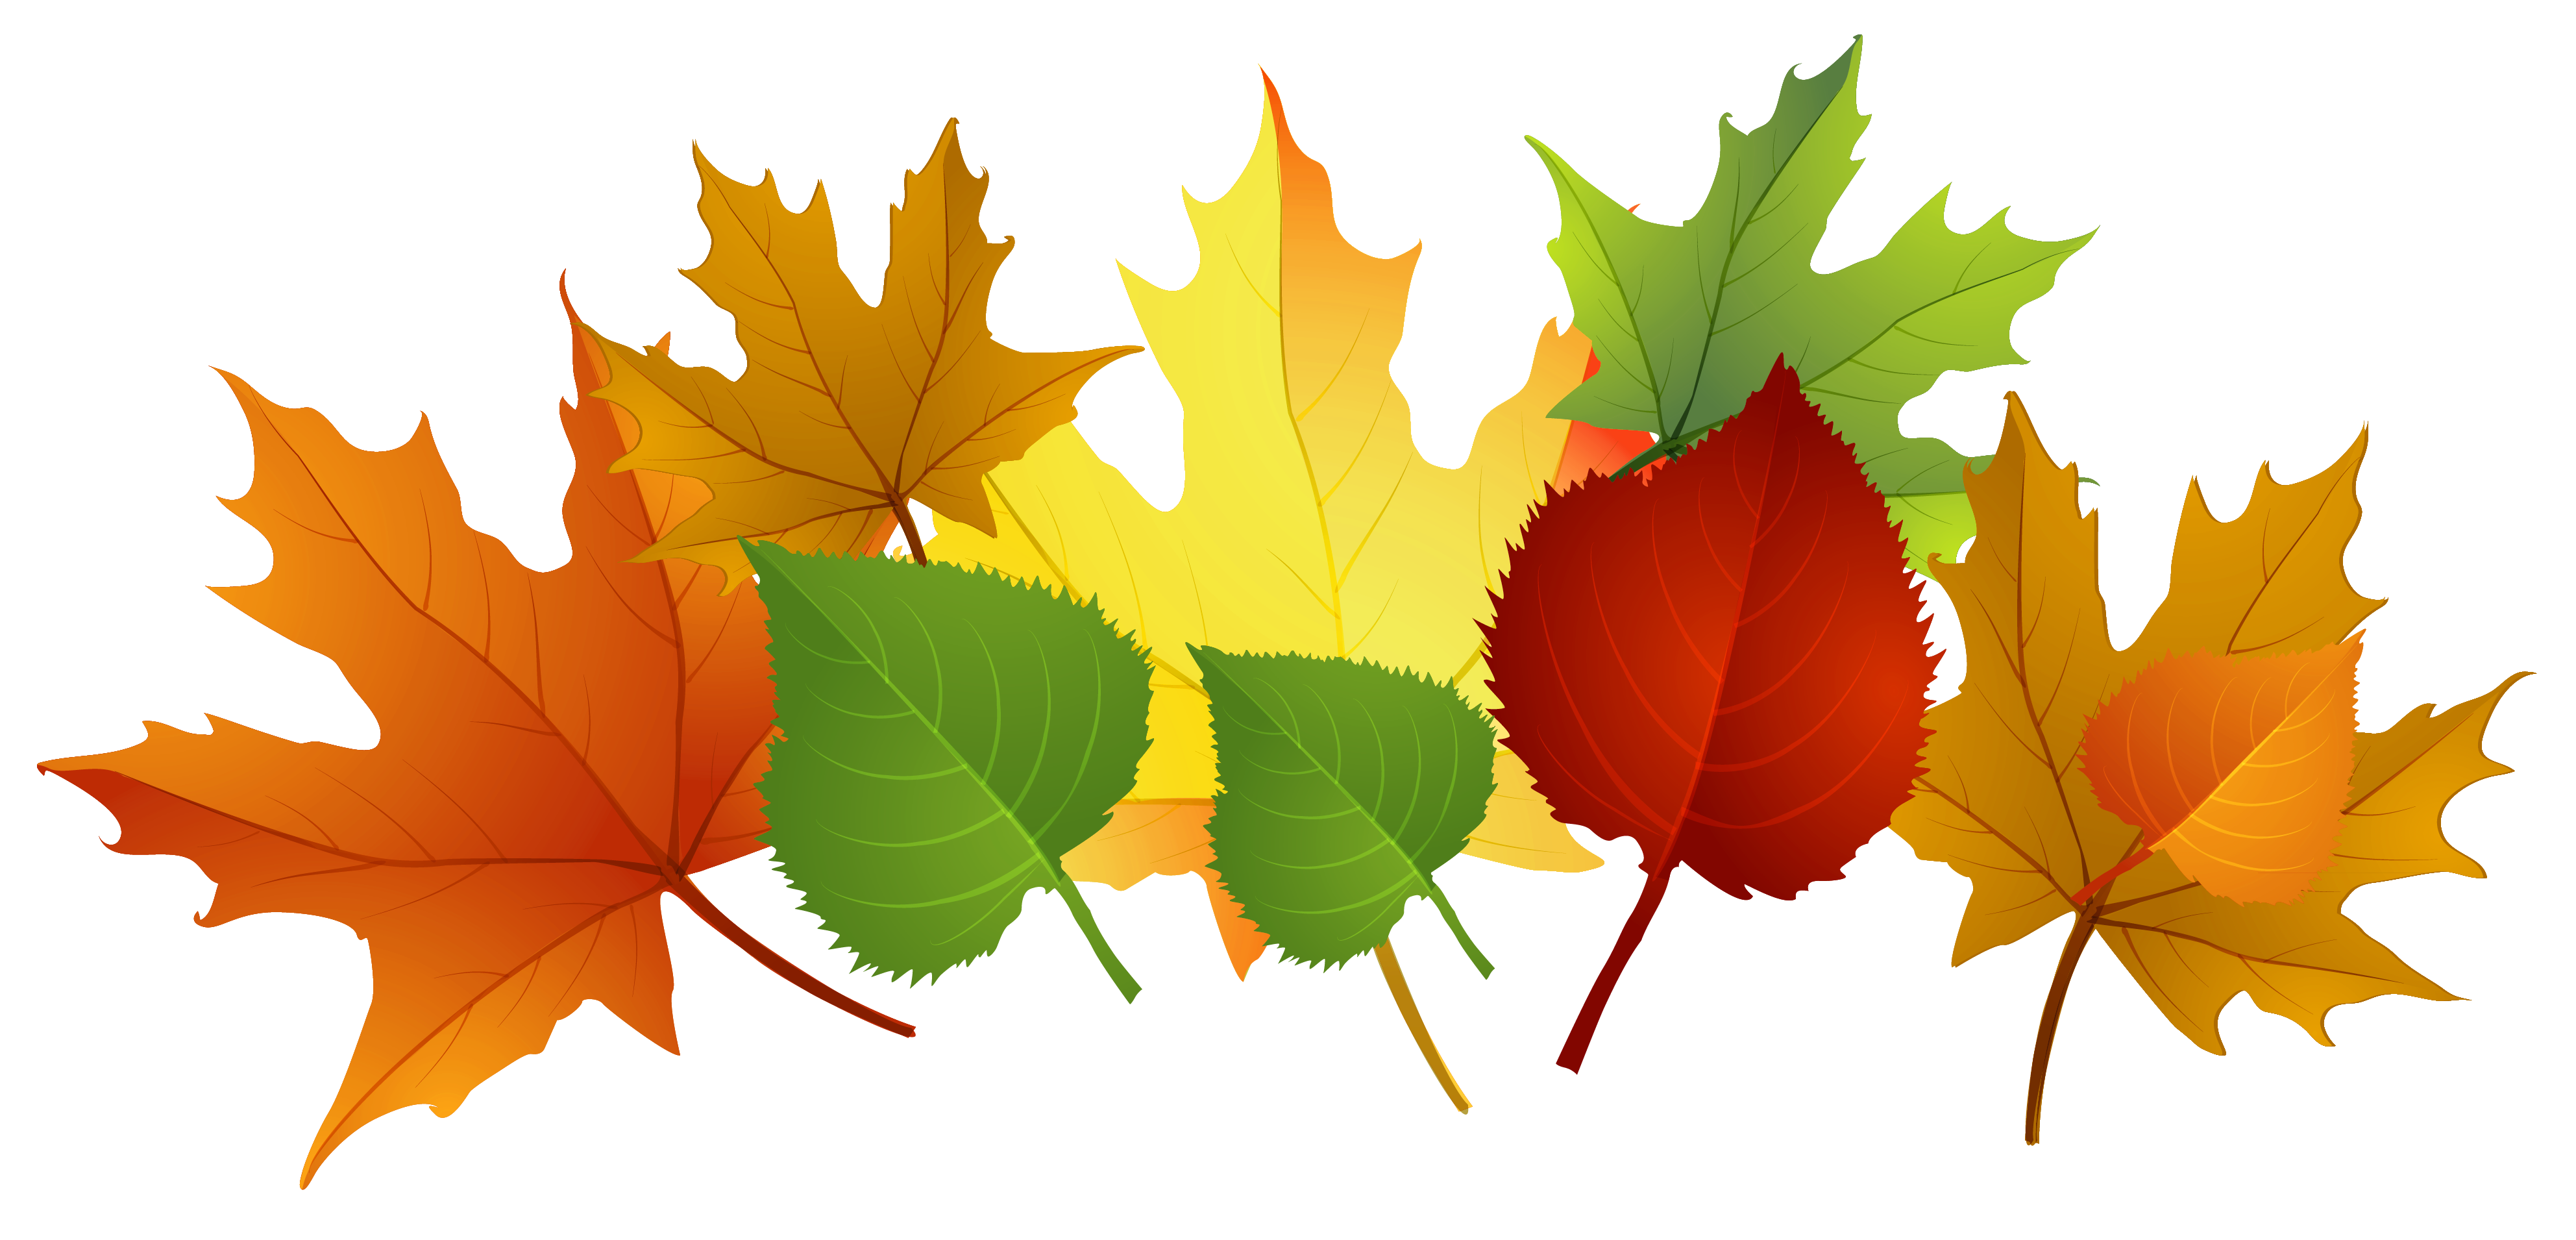 Leaf Fall Autumn Leaves 3 Png Image Clipart